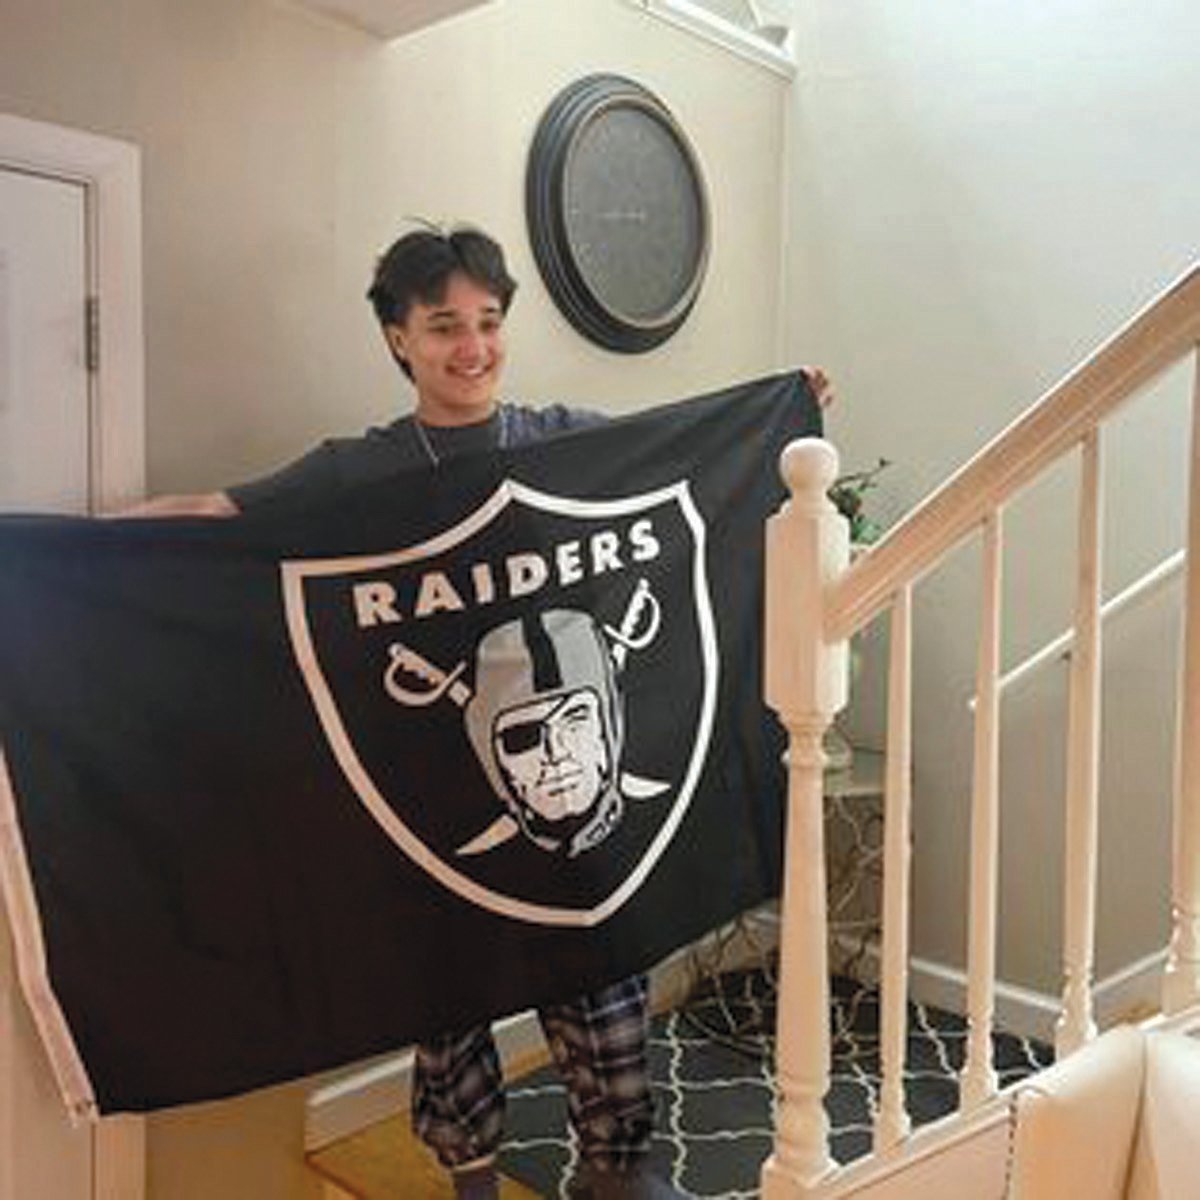 CHRISTMAS GIFT: Less than a month before her death, Olivia Passaretti holds a Las Vegas Raiders banner she received as a Christmas present.